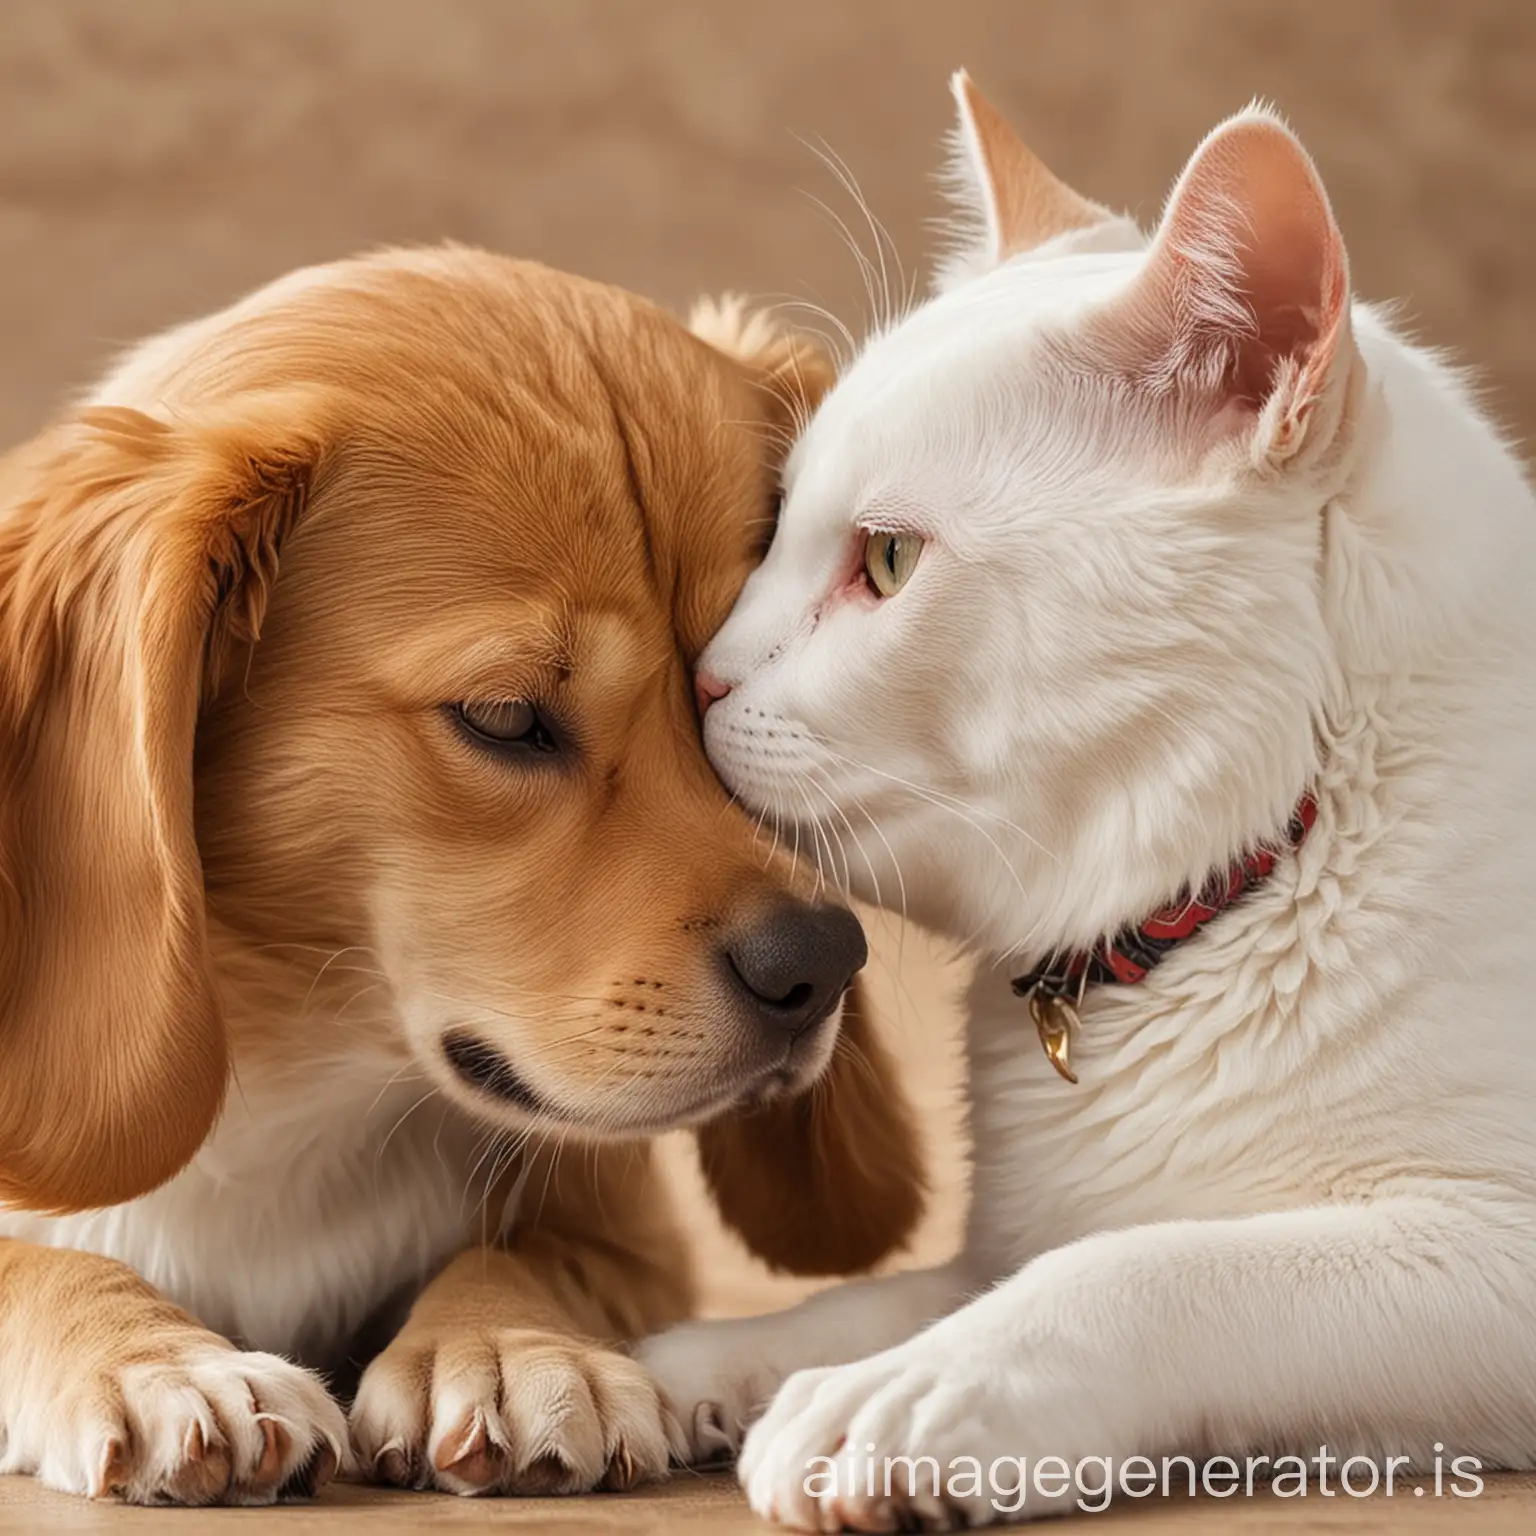 Affectionate-Cat-and-Dog-Kissing-in-a-Heartwarming-Moment